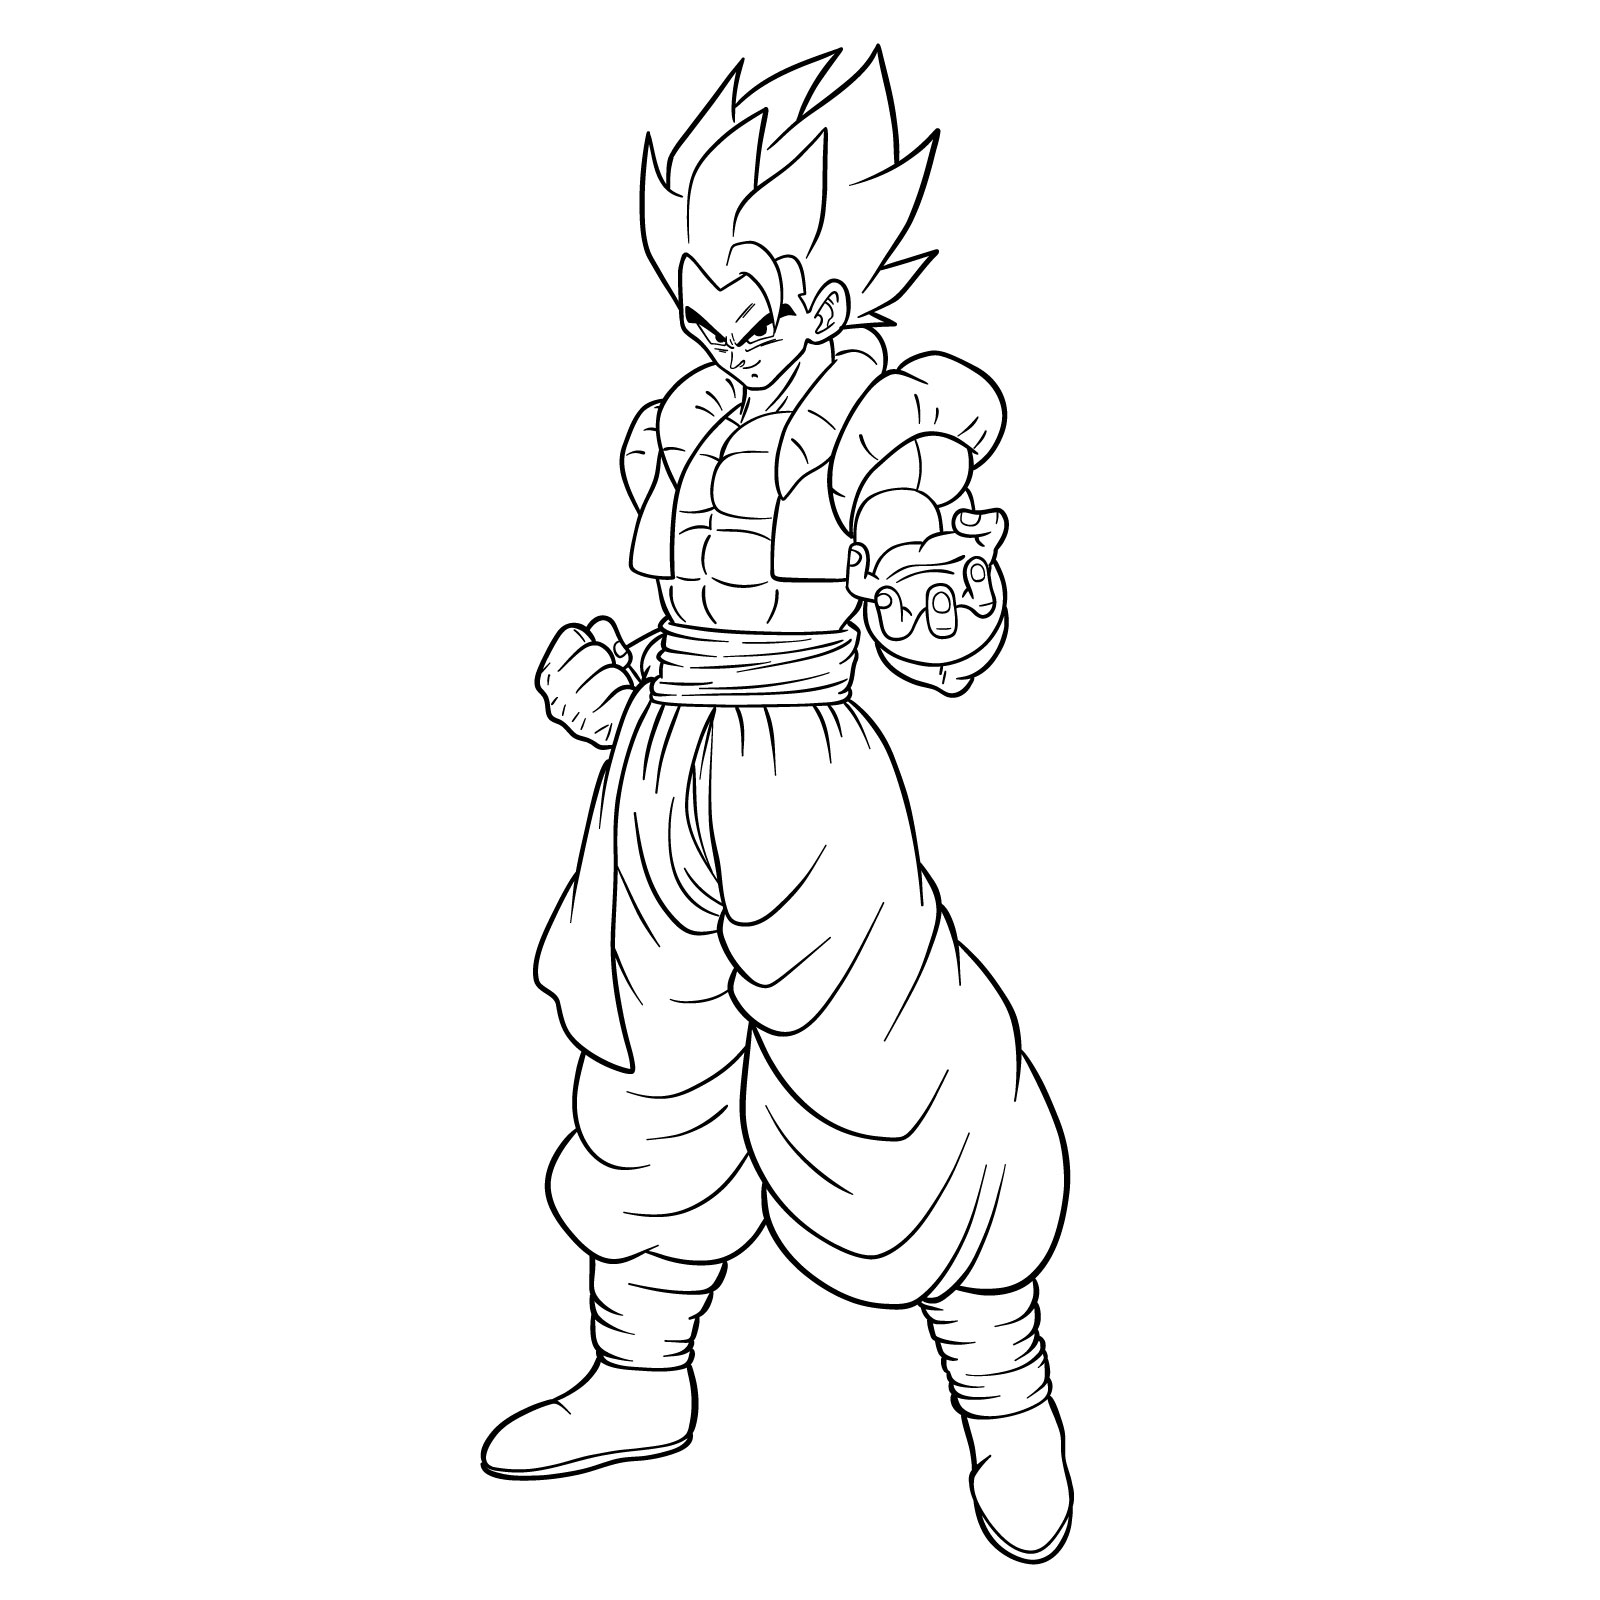 How to draw Gogeta in Base - final step